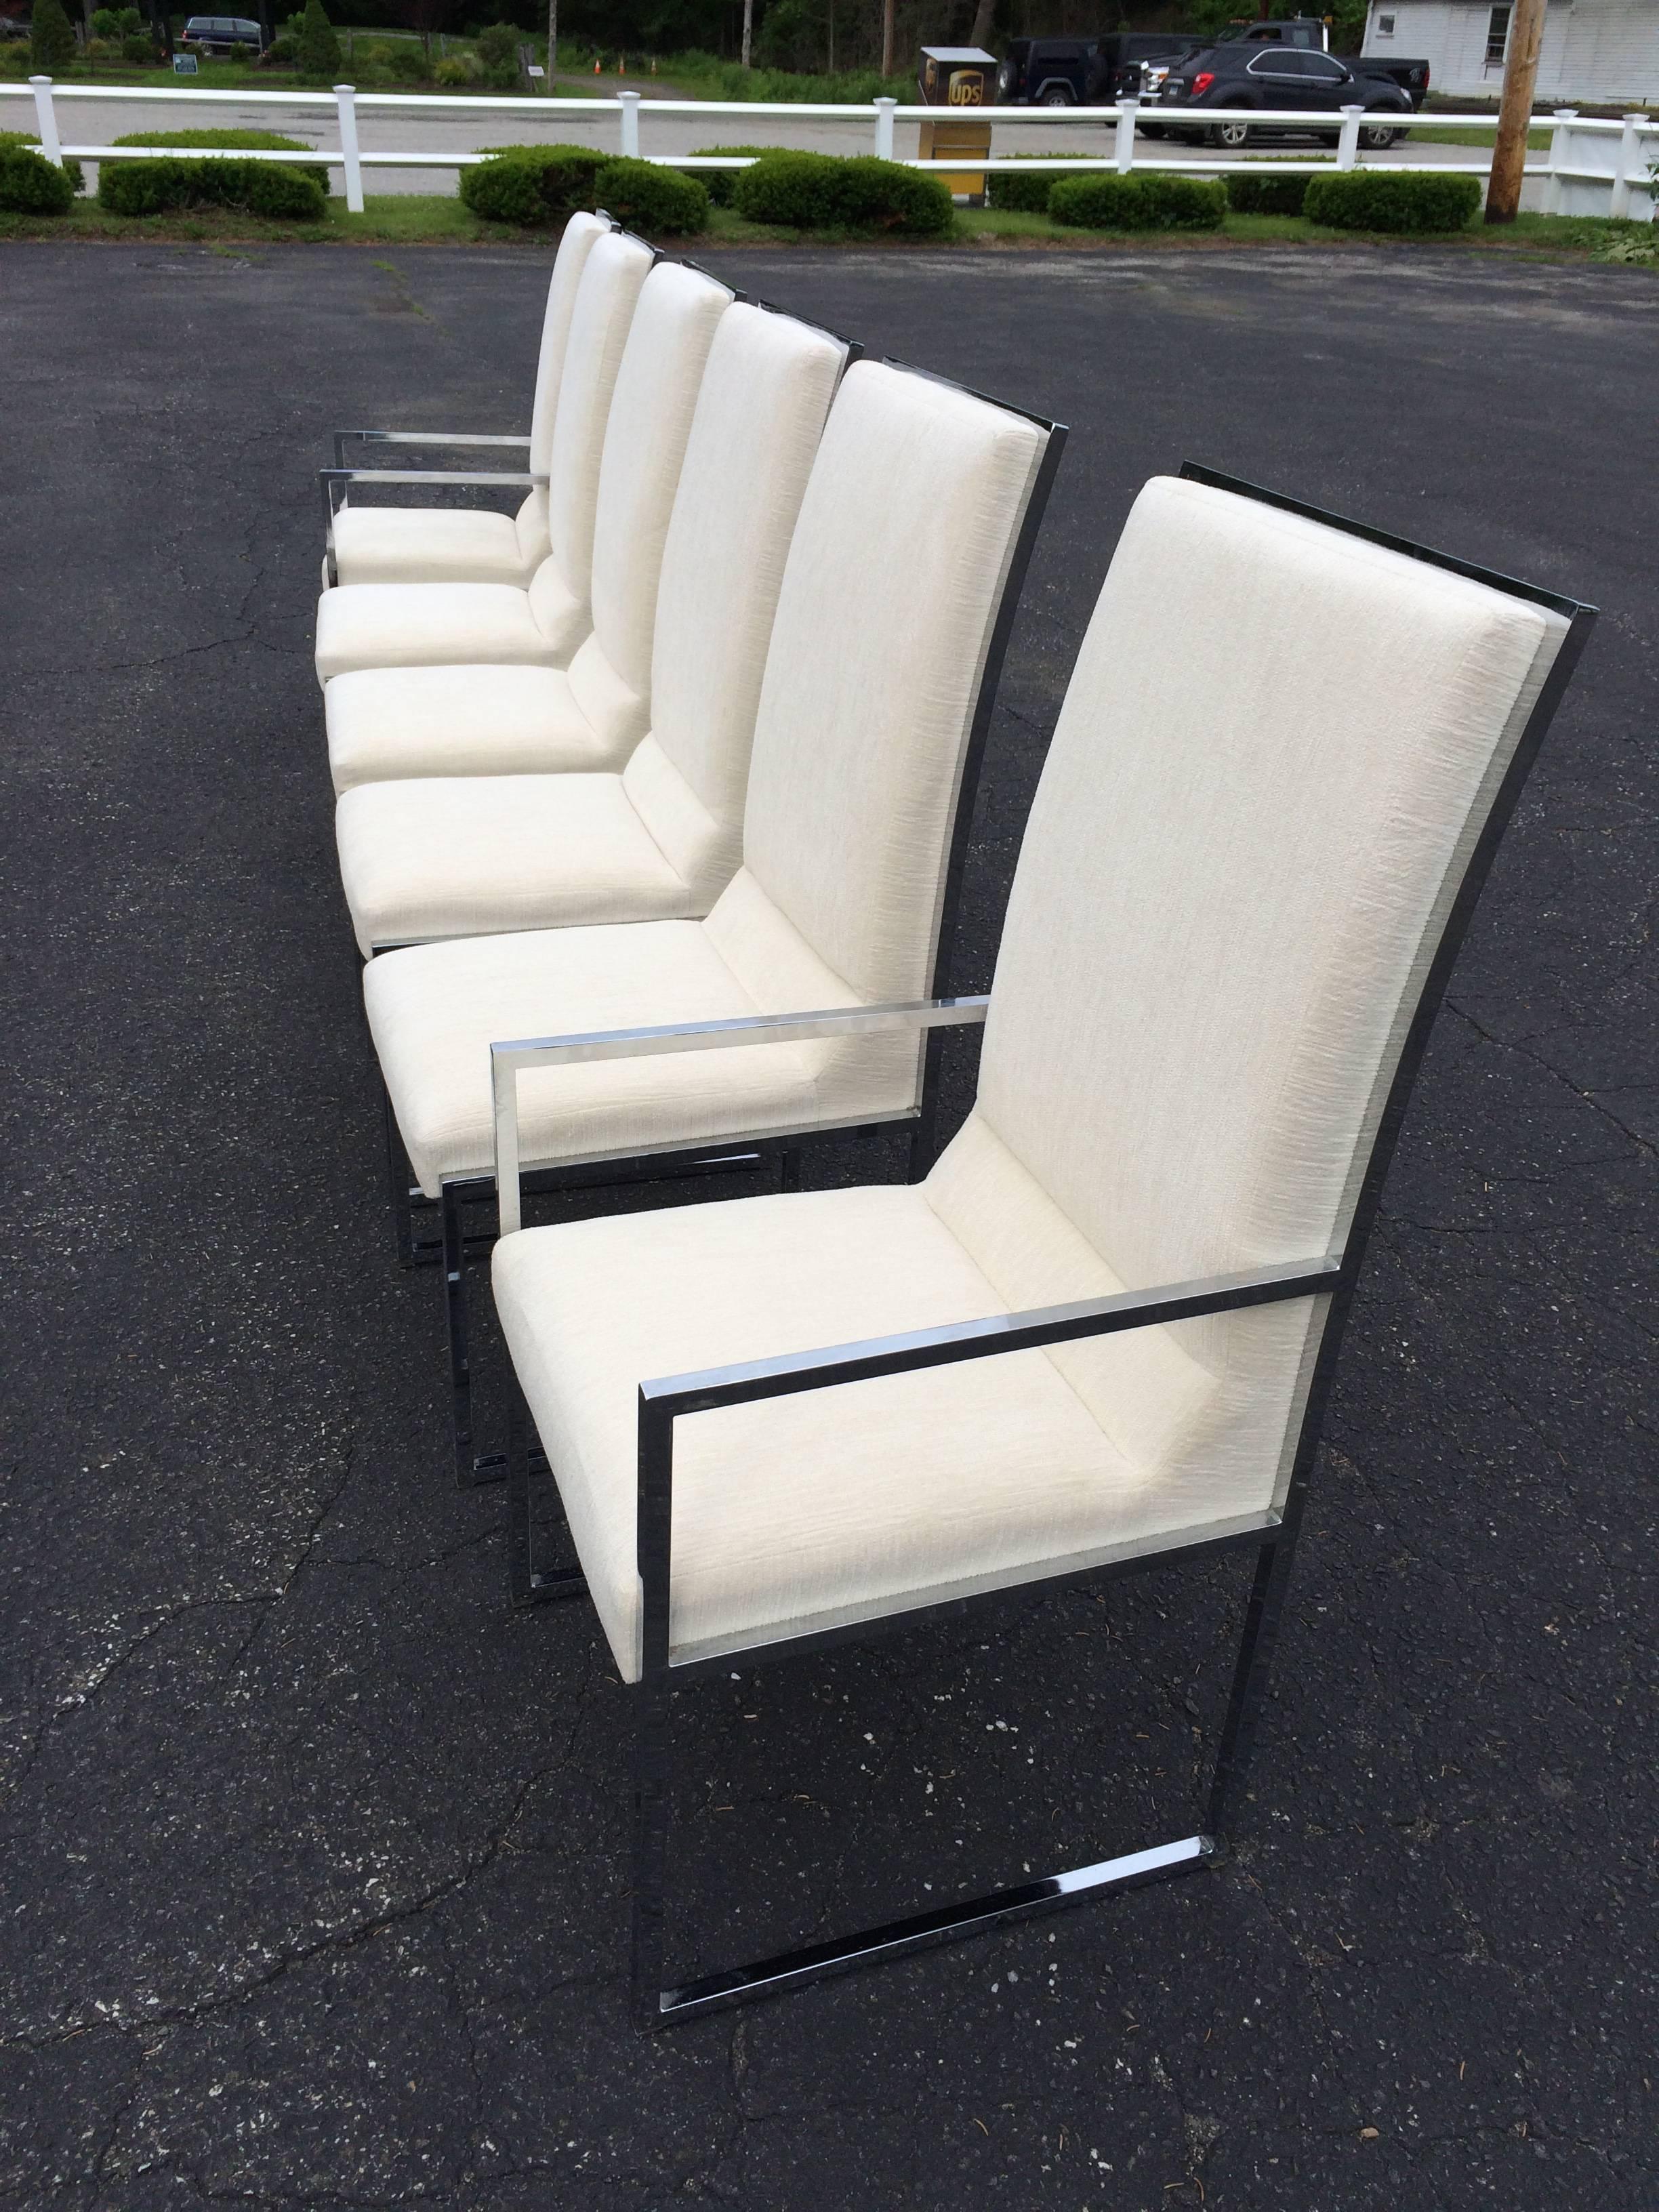 Polished Set of Six Chrome DIA Dining Room Chairs Attributed to Milo Baughman